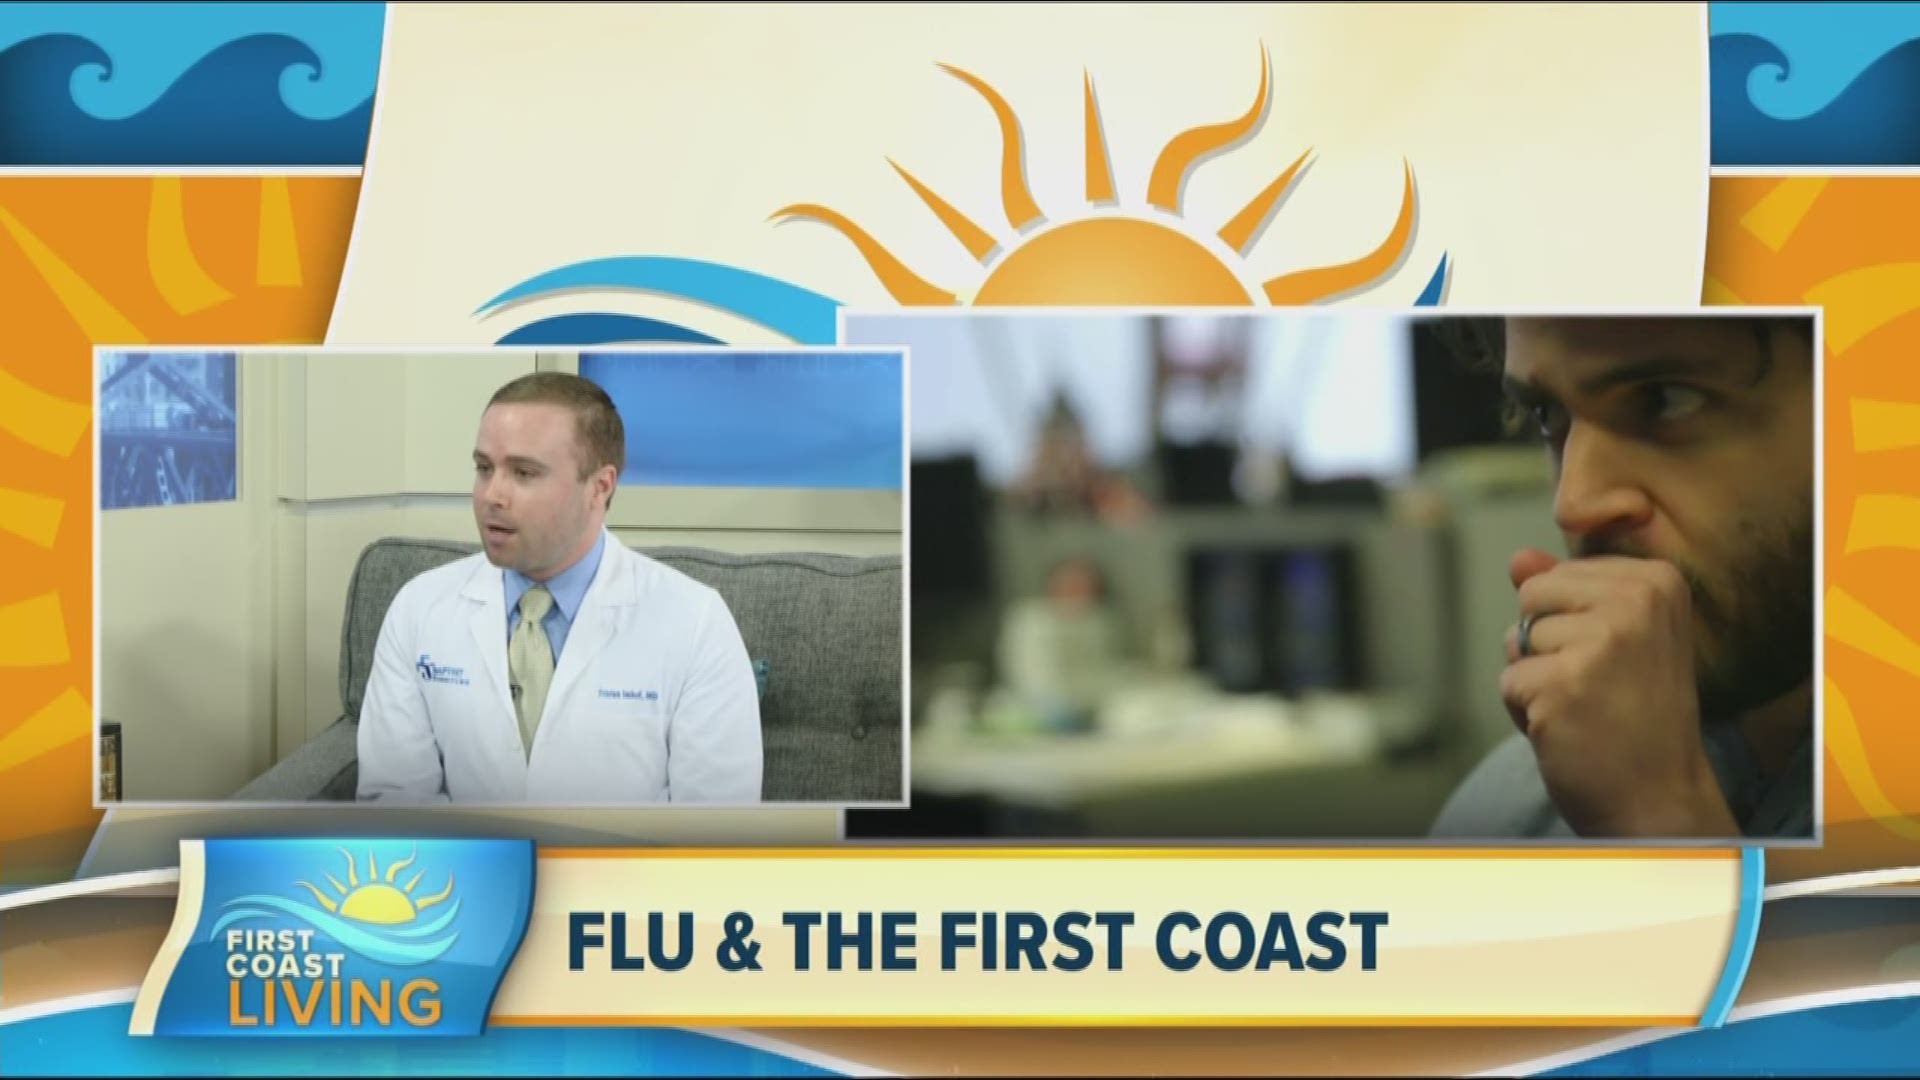 Learn more about what local doctors are seeing this flu season.